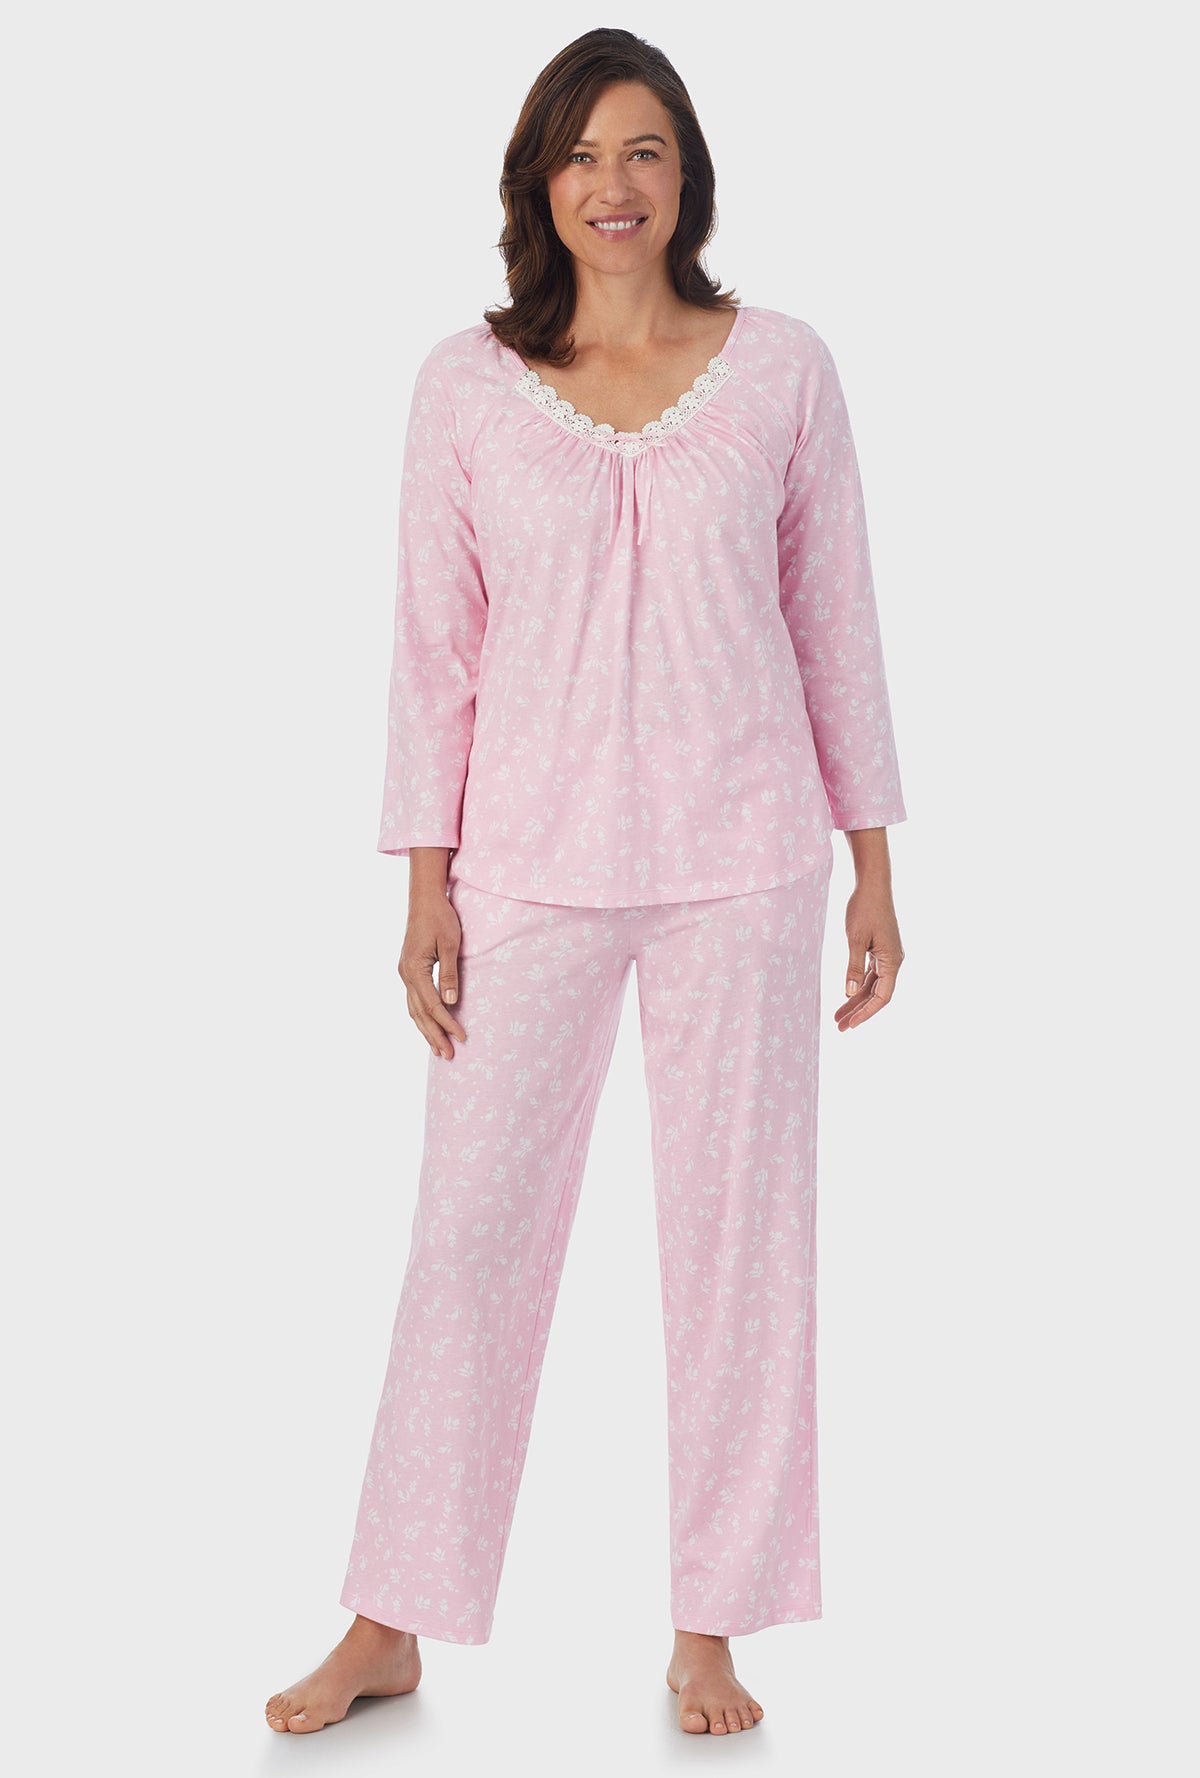 A lady wearing pink 3/4 Sleeve Long Pant PJ Set with White Rosebuds  print